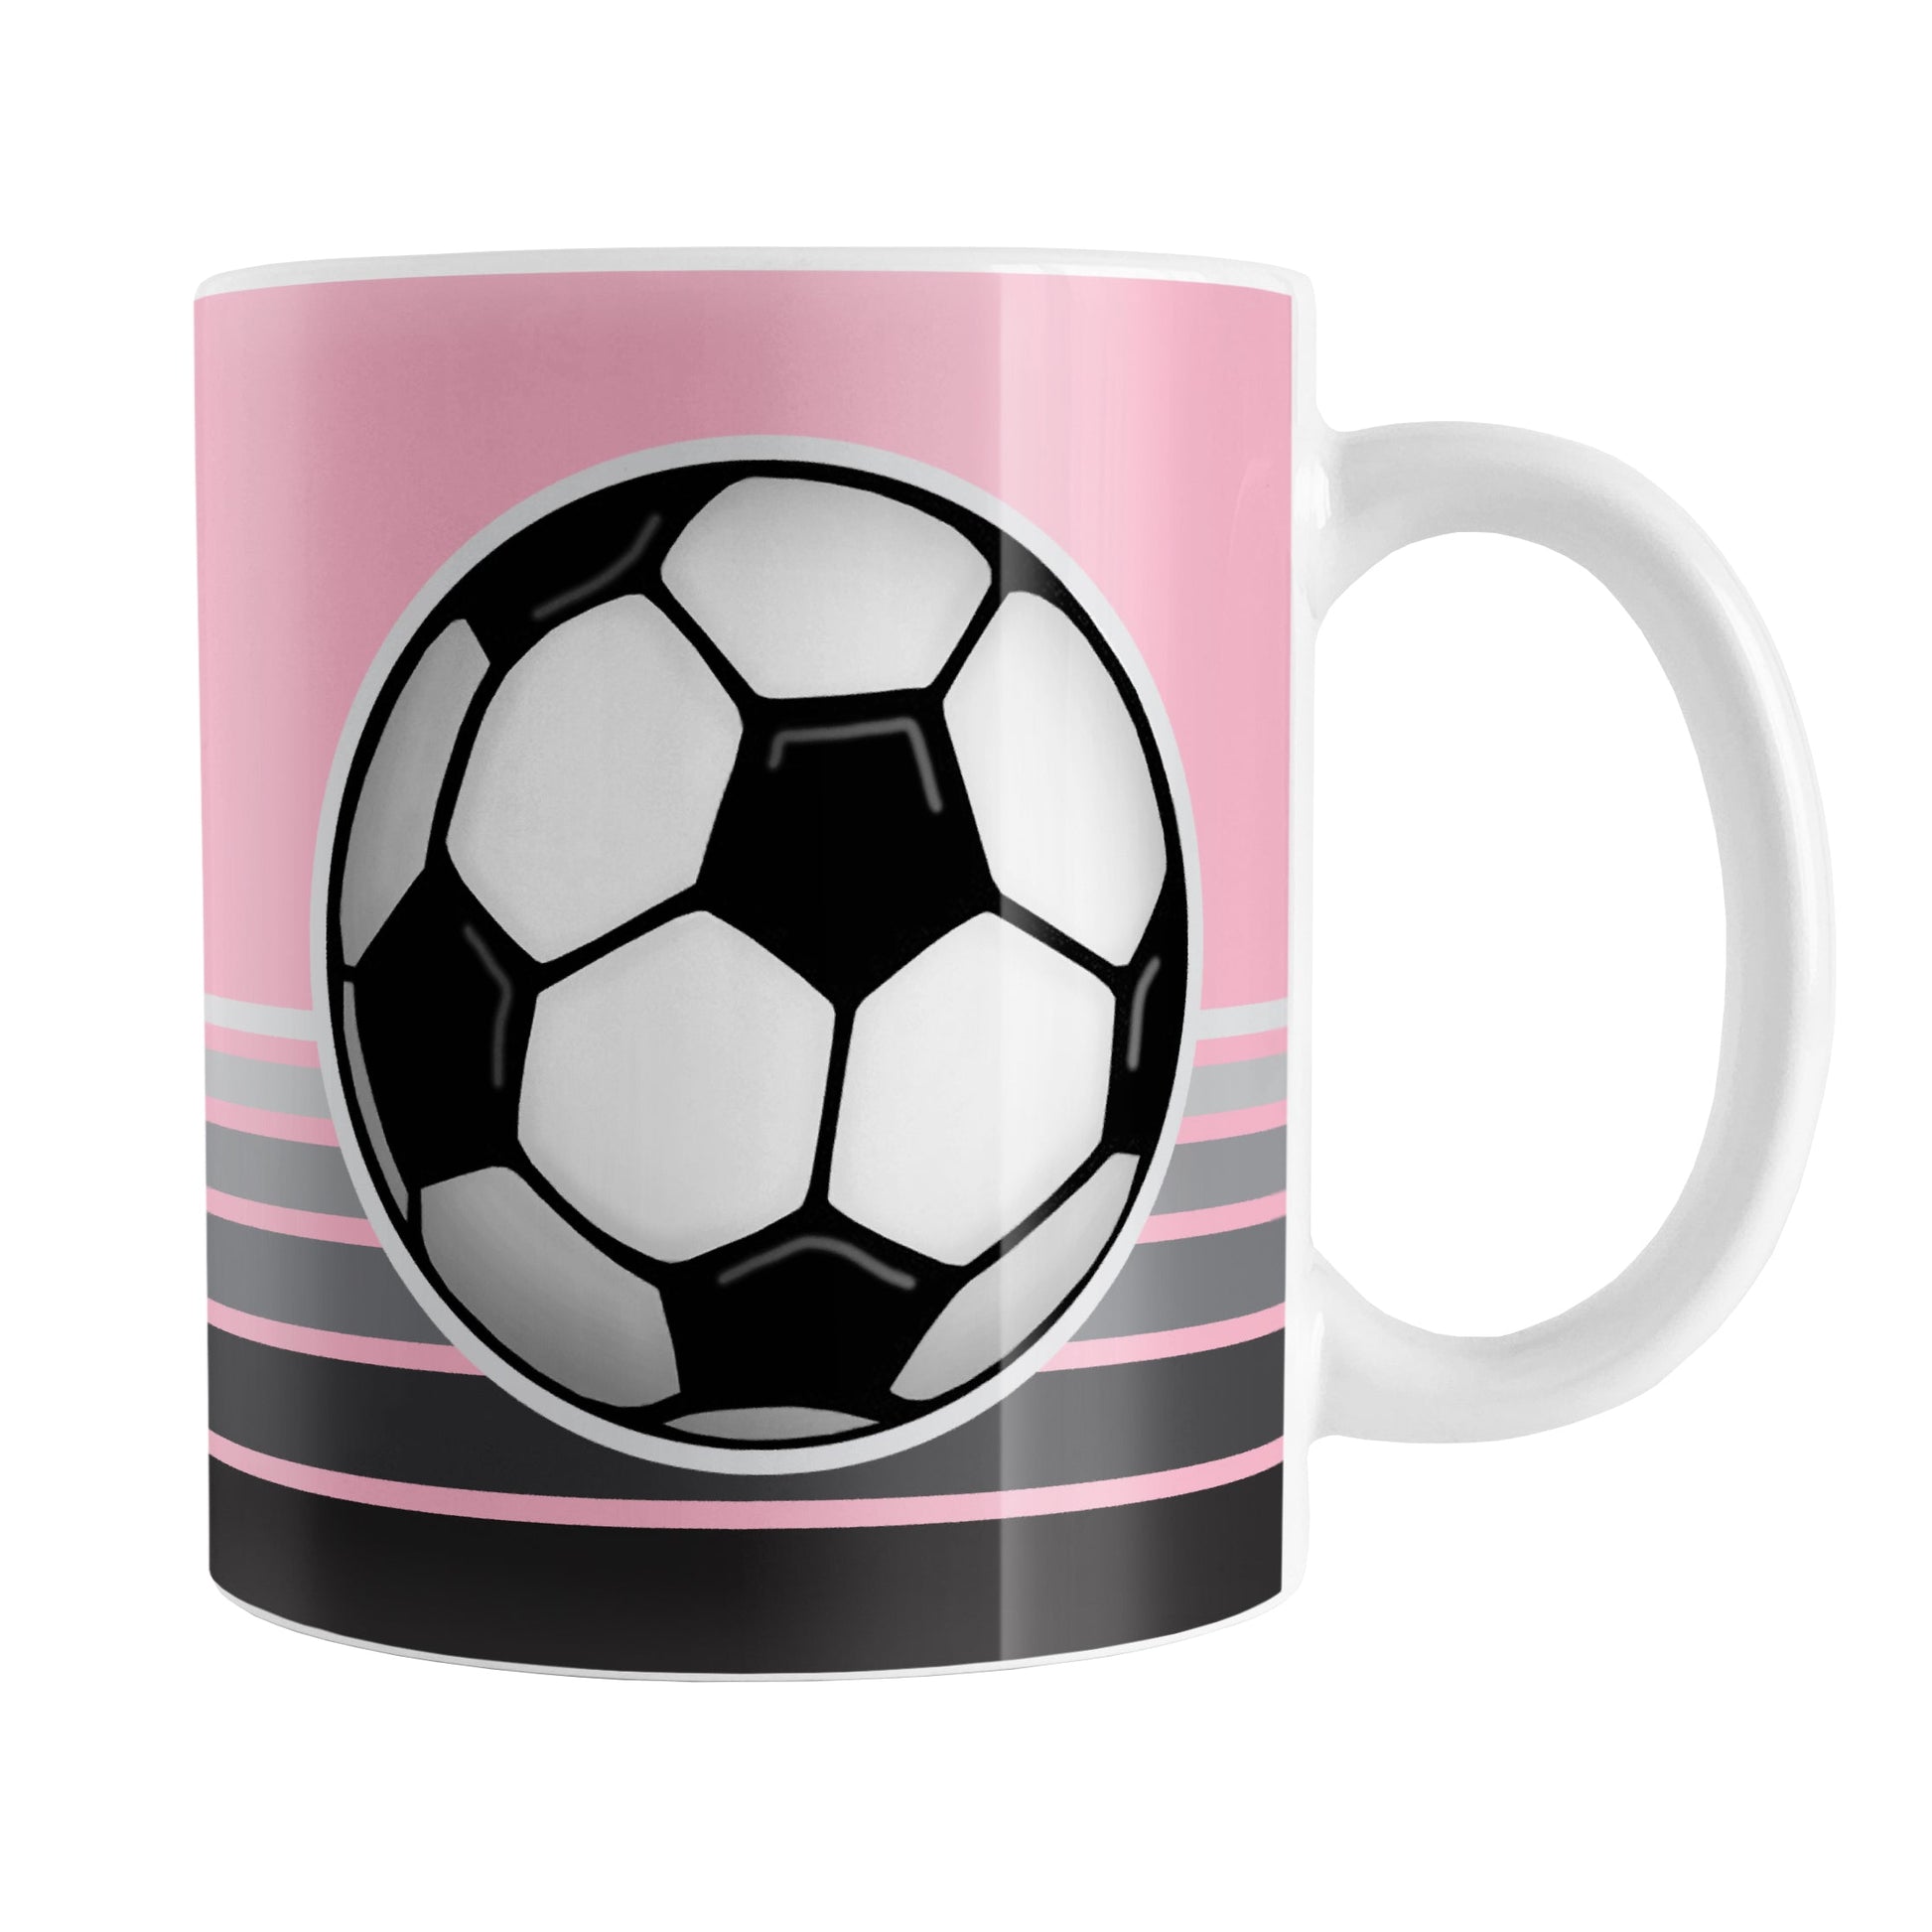 Gray Gradient Lined Pink Soccer Ball Mug (11oz) at Amy's Coffee Mugs. A ceramic coffee mug designed with a big soccer ball on both sides of the mug over gradient black to gray lines along the bottom over a pink background color that wraps around the mug up to the handle.